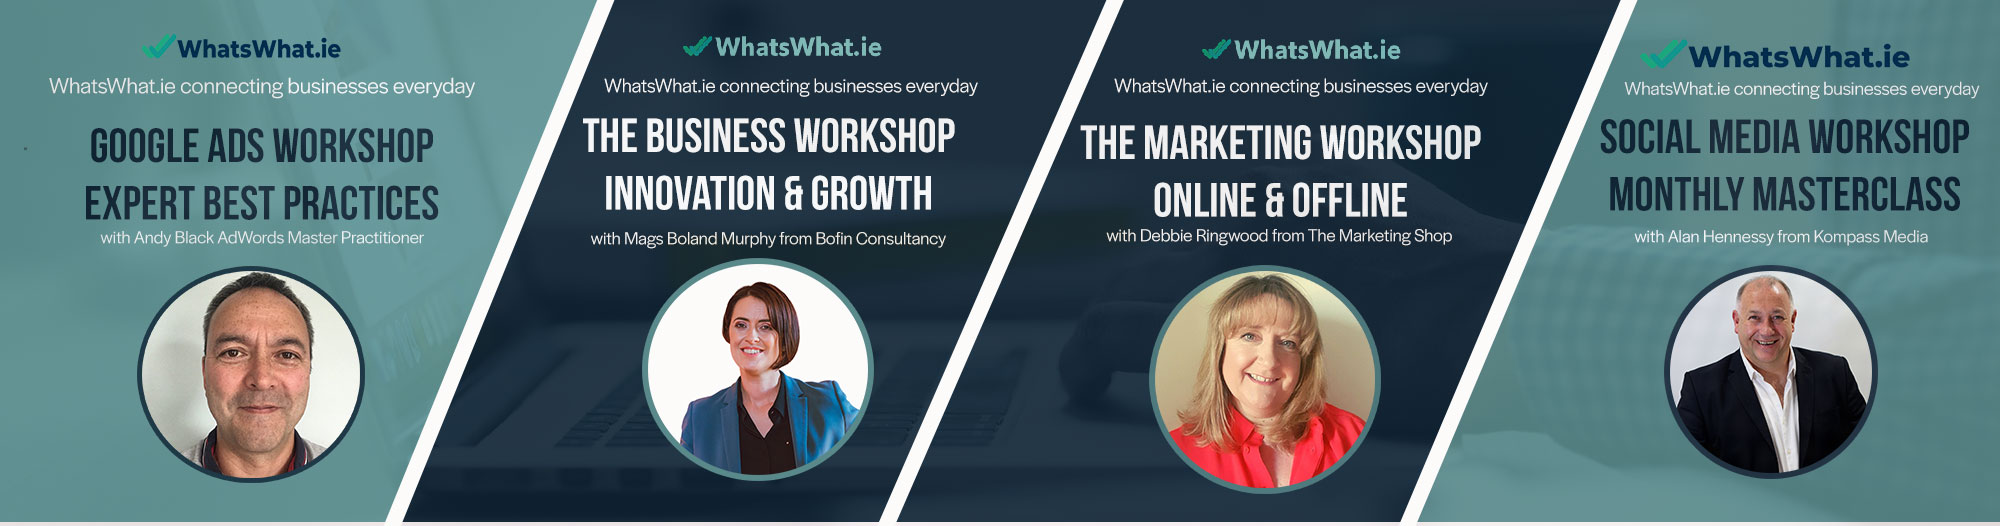 WhatsWhat.ie Business Workshops